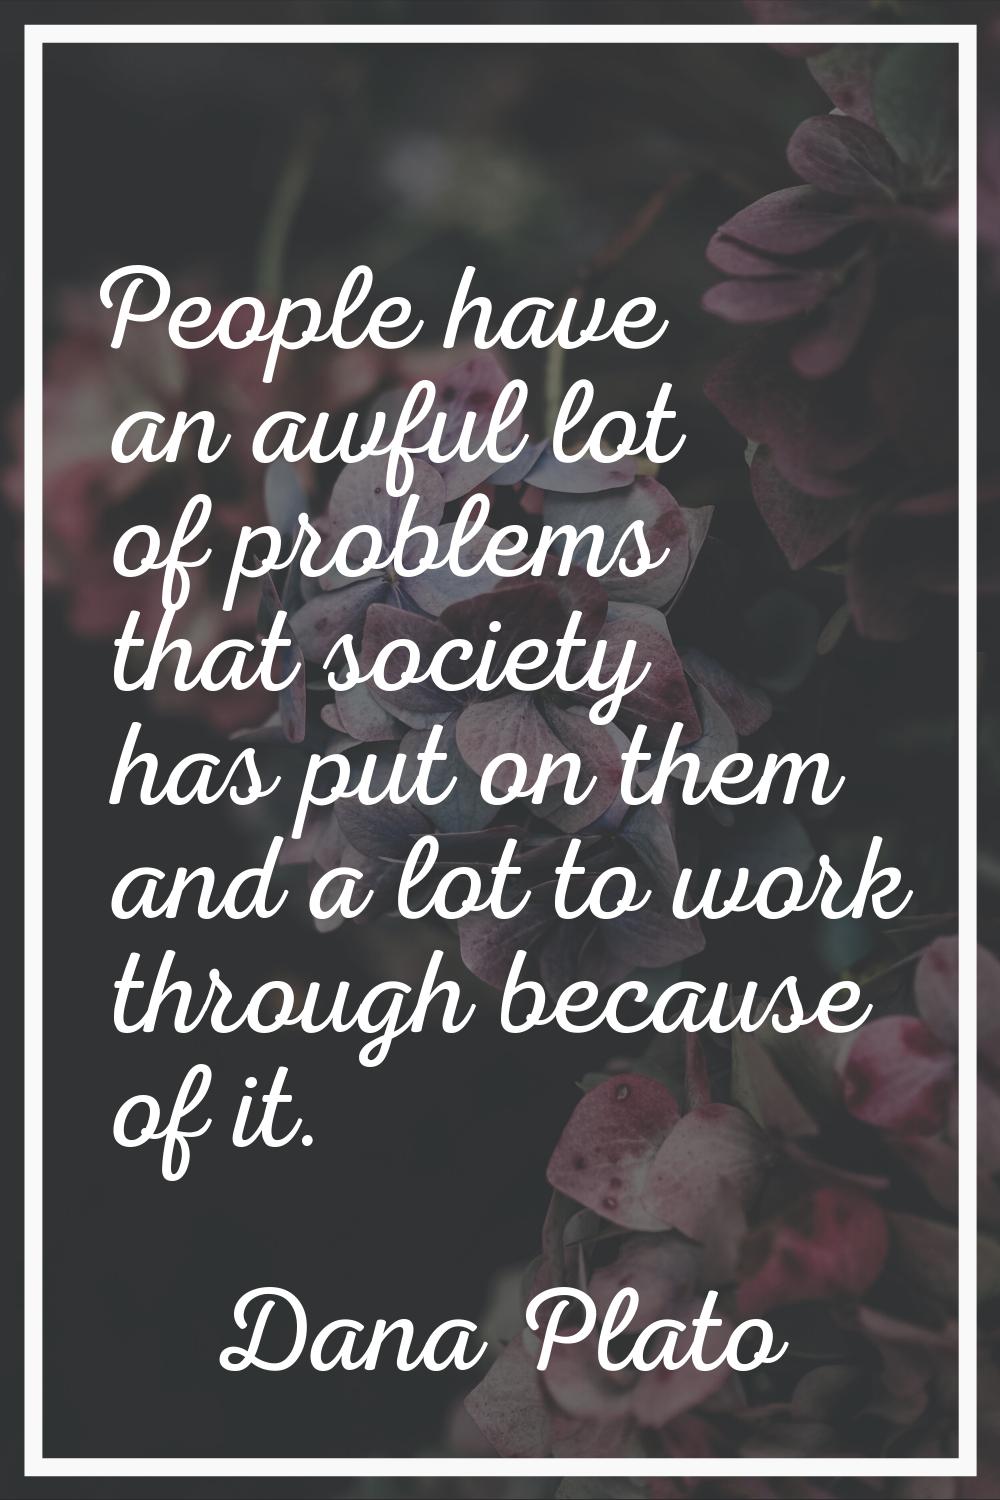 People have an awful lot of problems that society has put on them and a lot to work through because